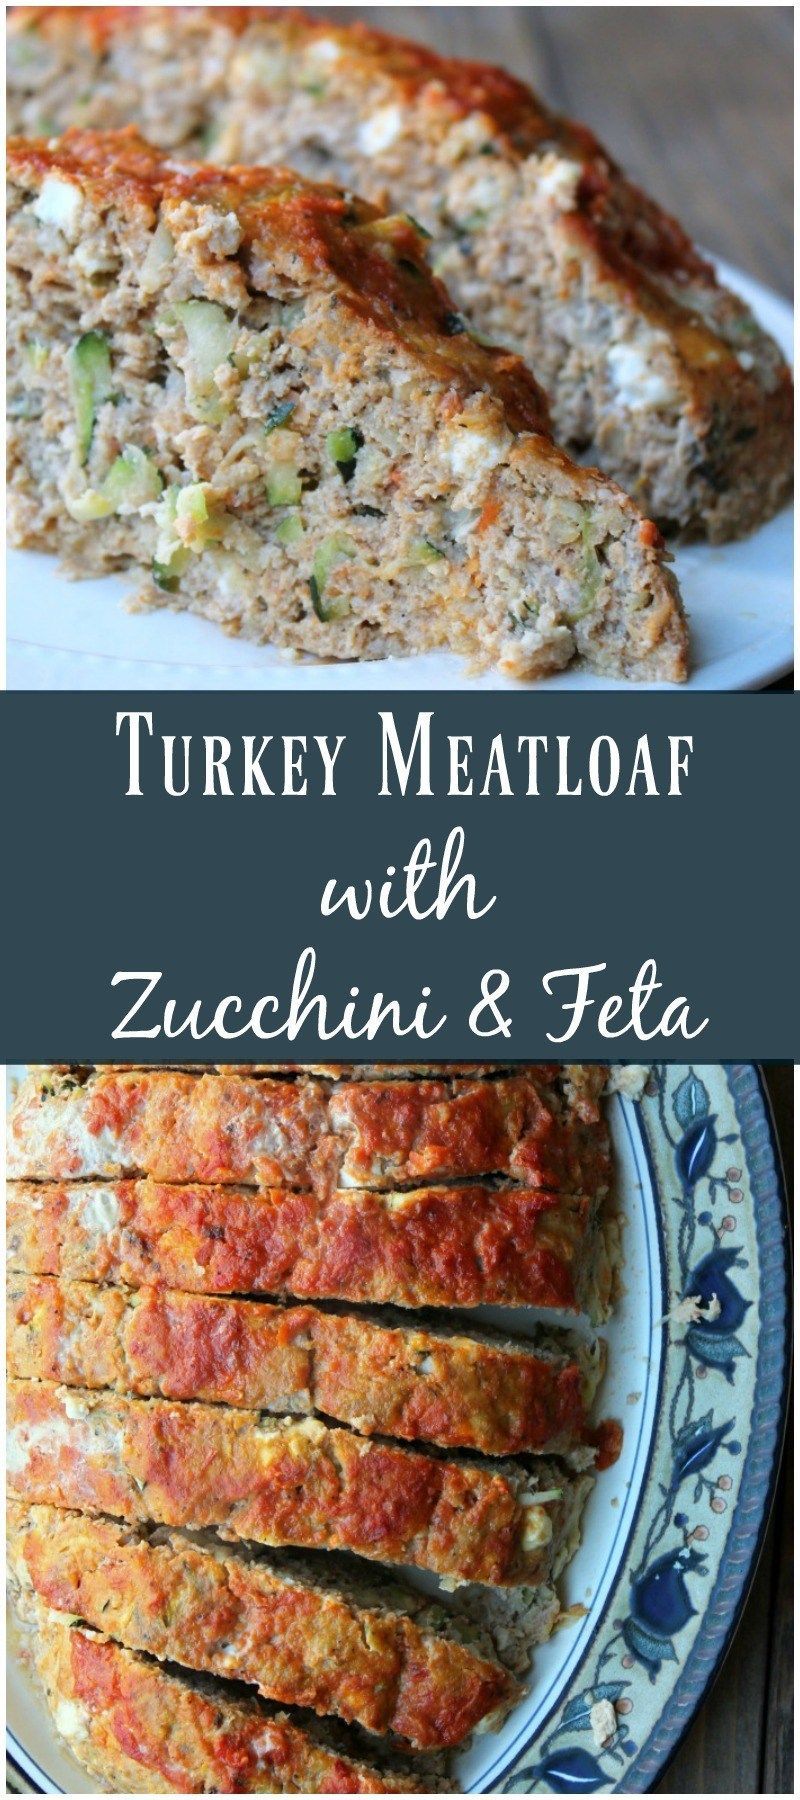 Turkey Meatloaf with Zucchini and Feta -   10 healthy recipes Beef low carb ideas